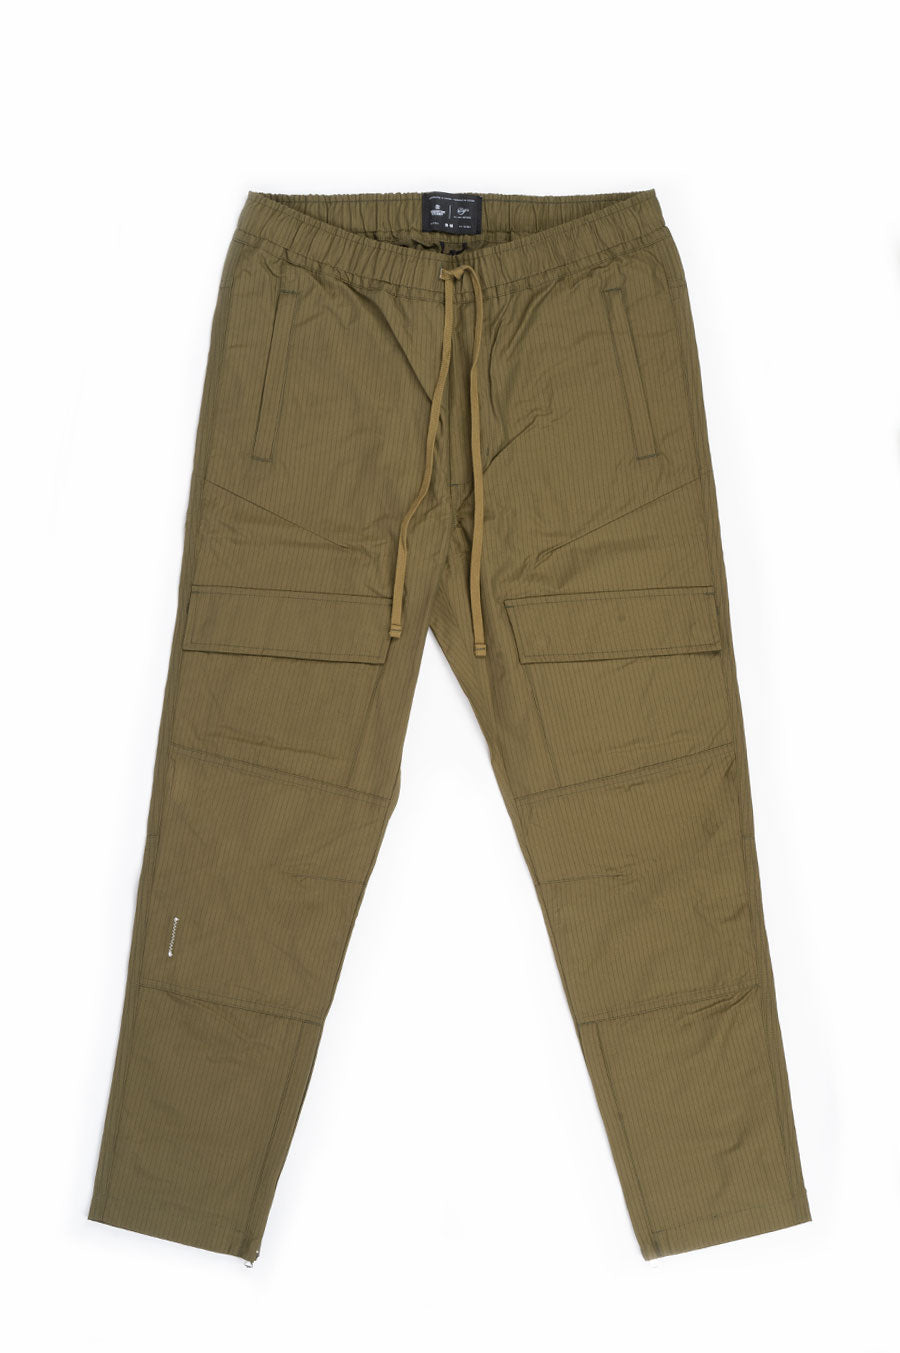 CHAMP CARGO MOSS RIPSTOP BLENDS PANT – S04 REIGNING